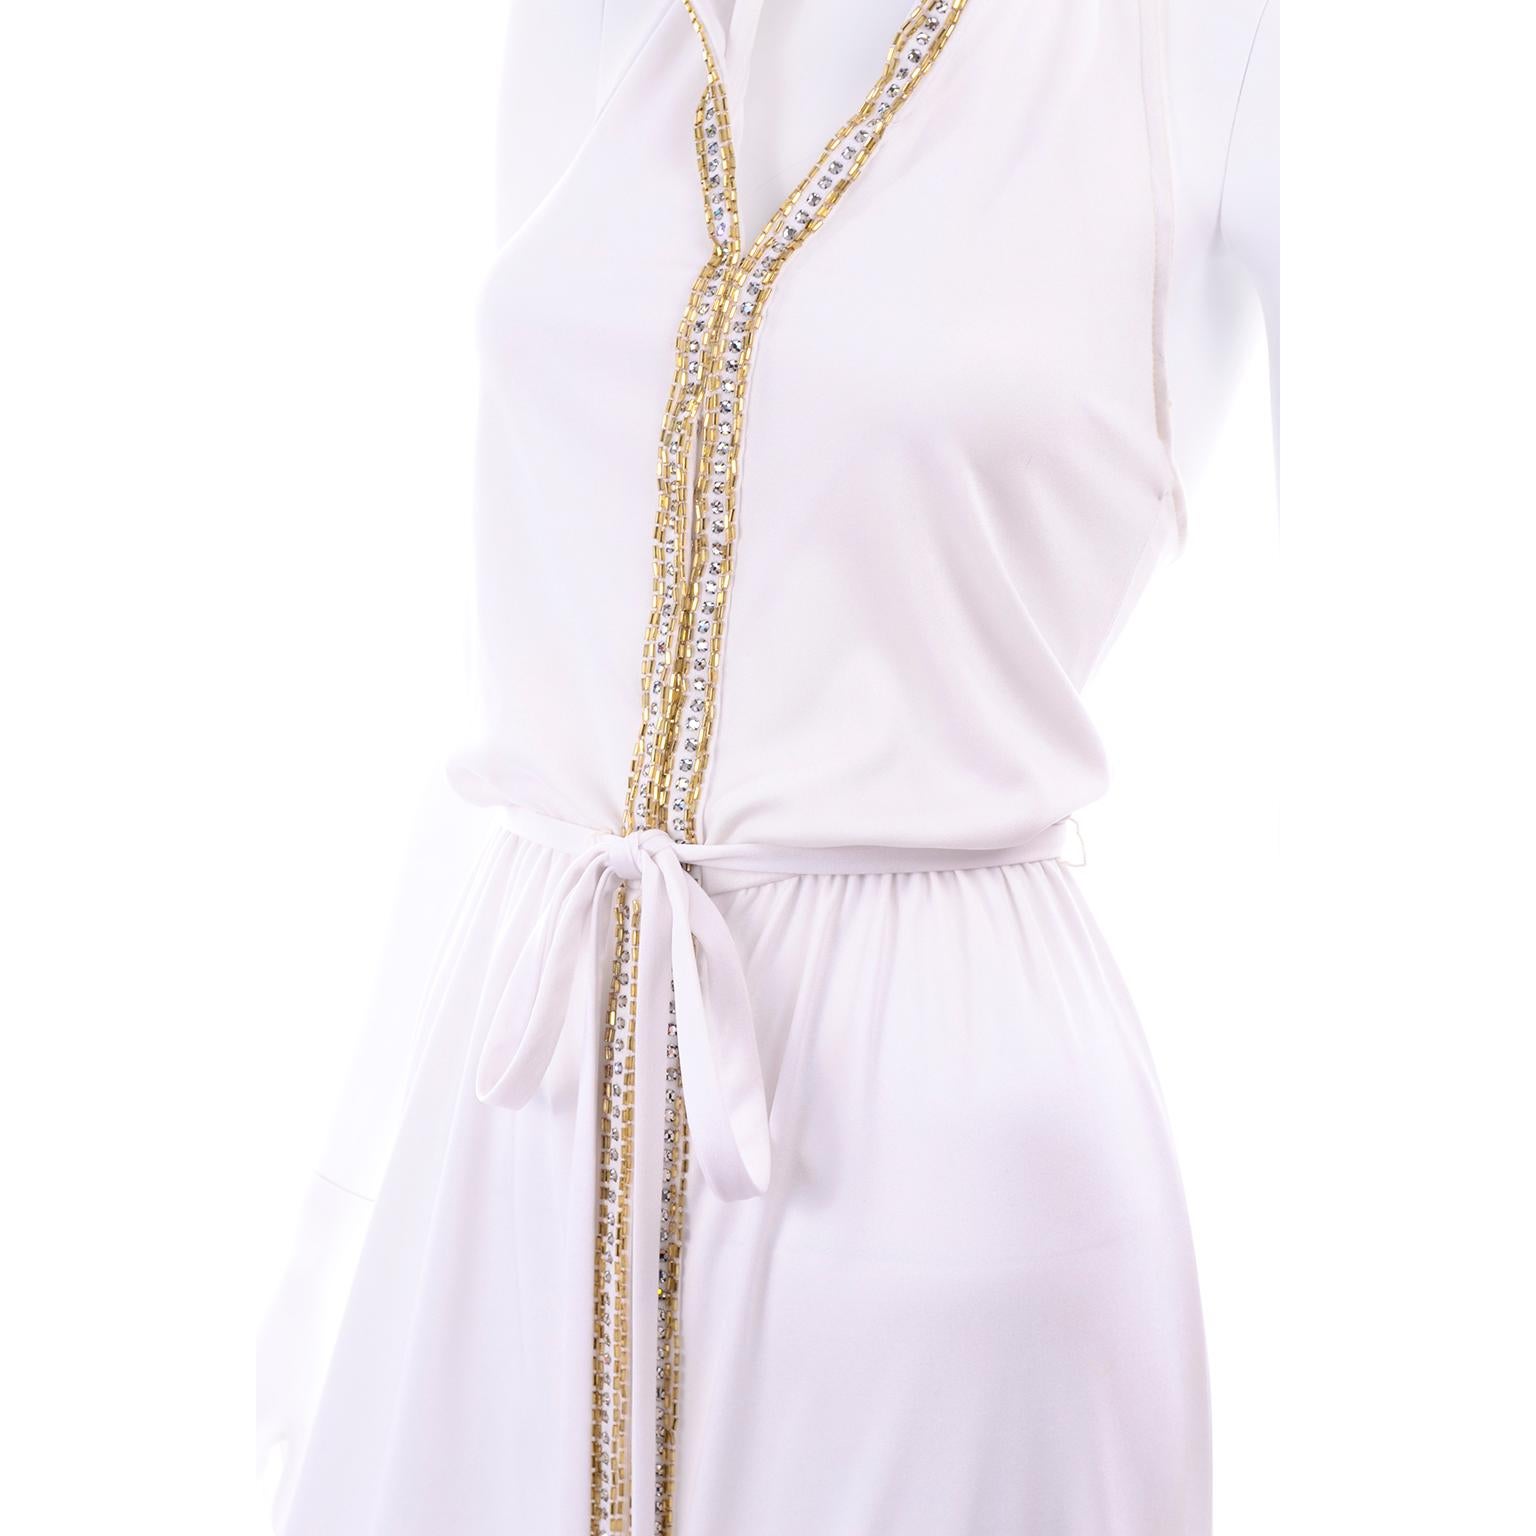 1970s Vintage White Hooded Jersey Maxi Dress With Gold Beads & Rhinestones 6